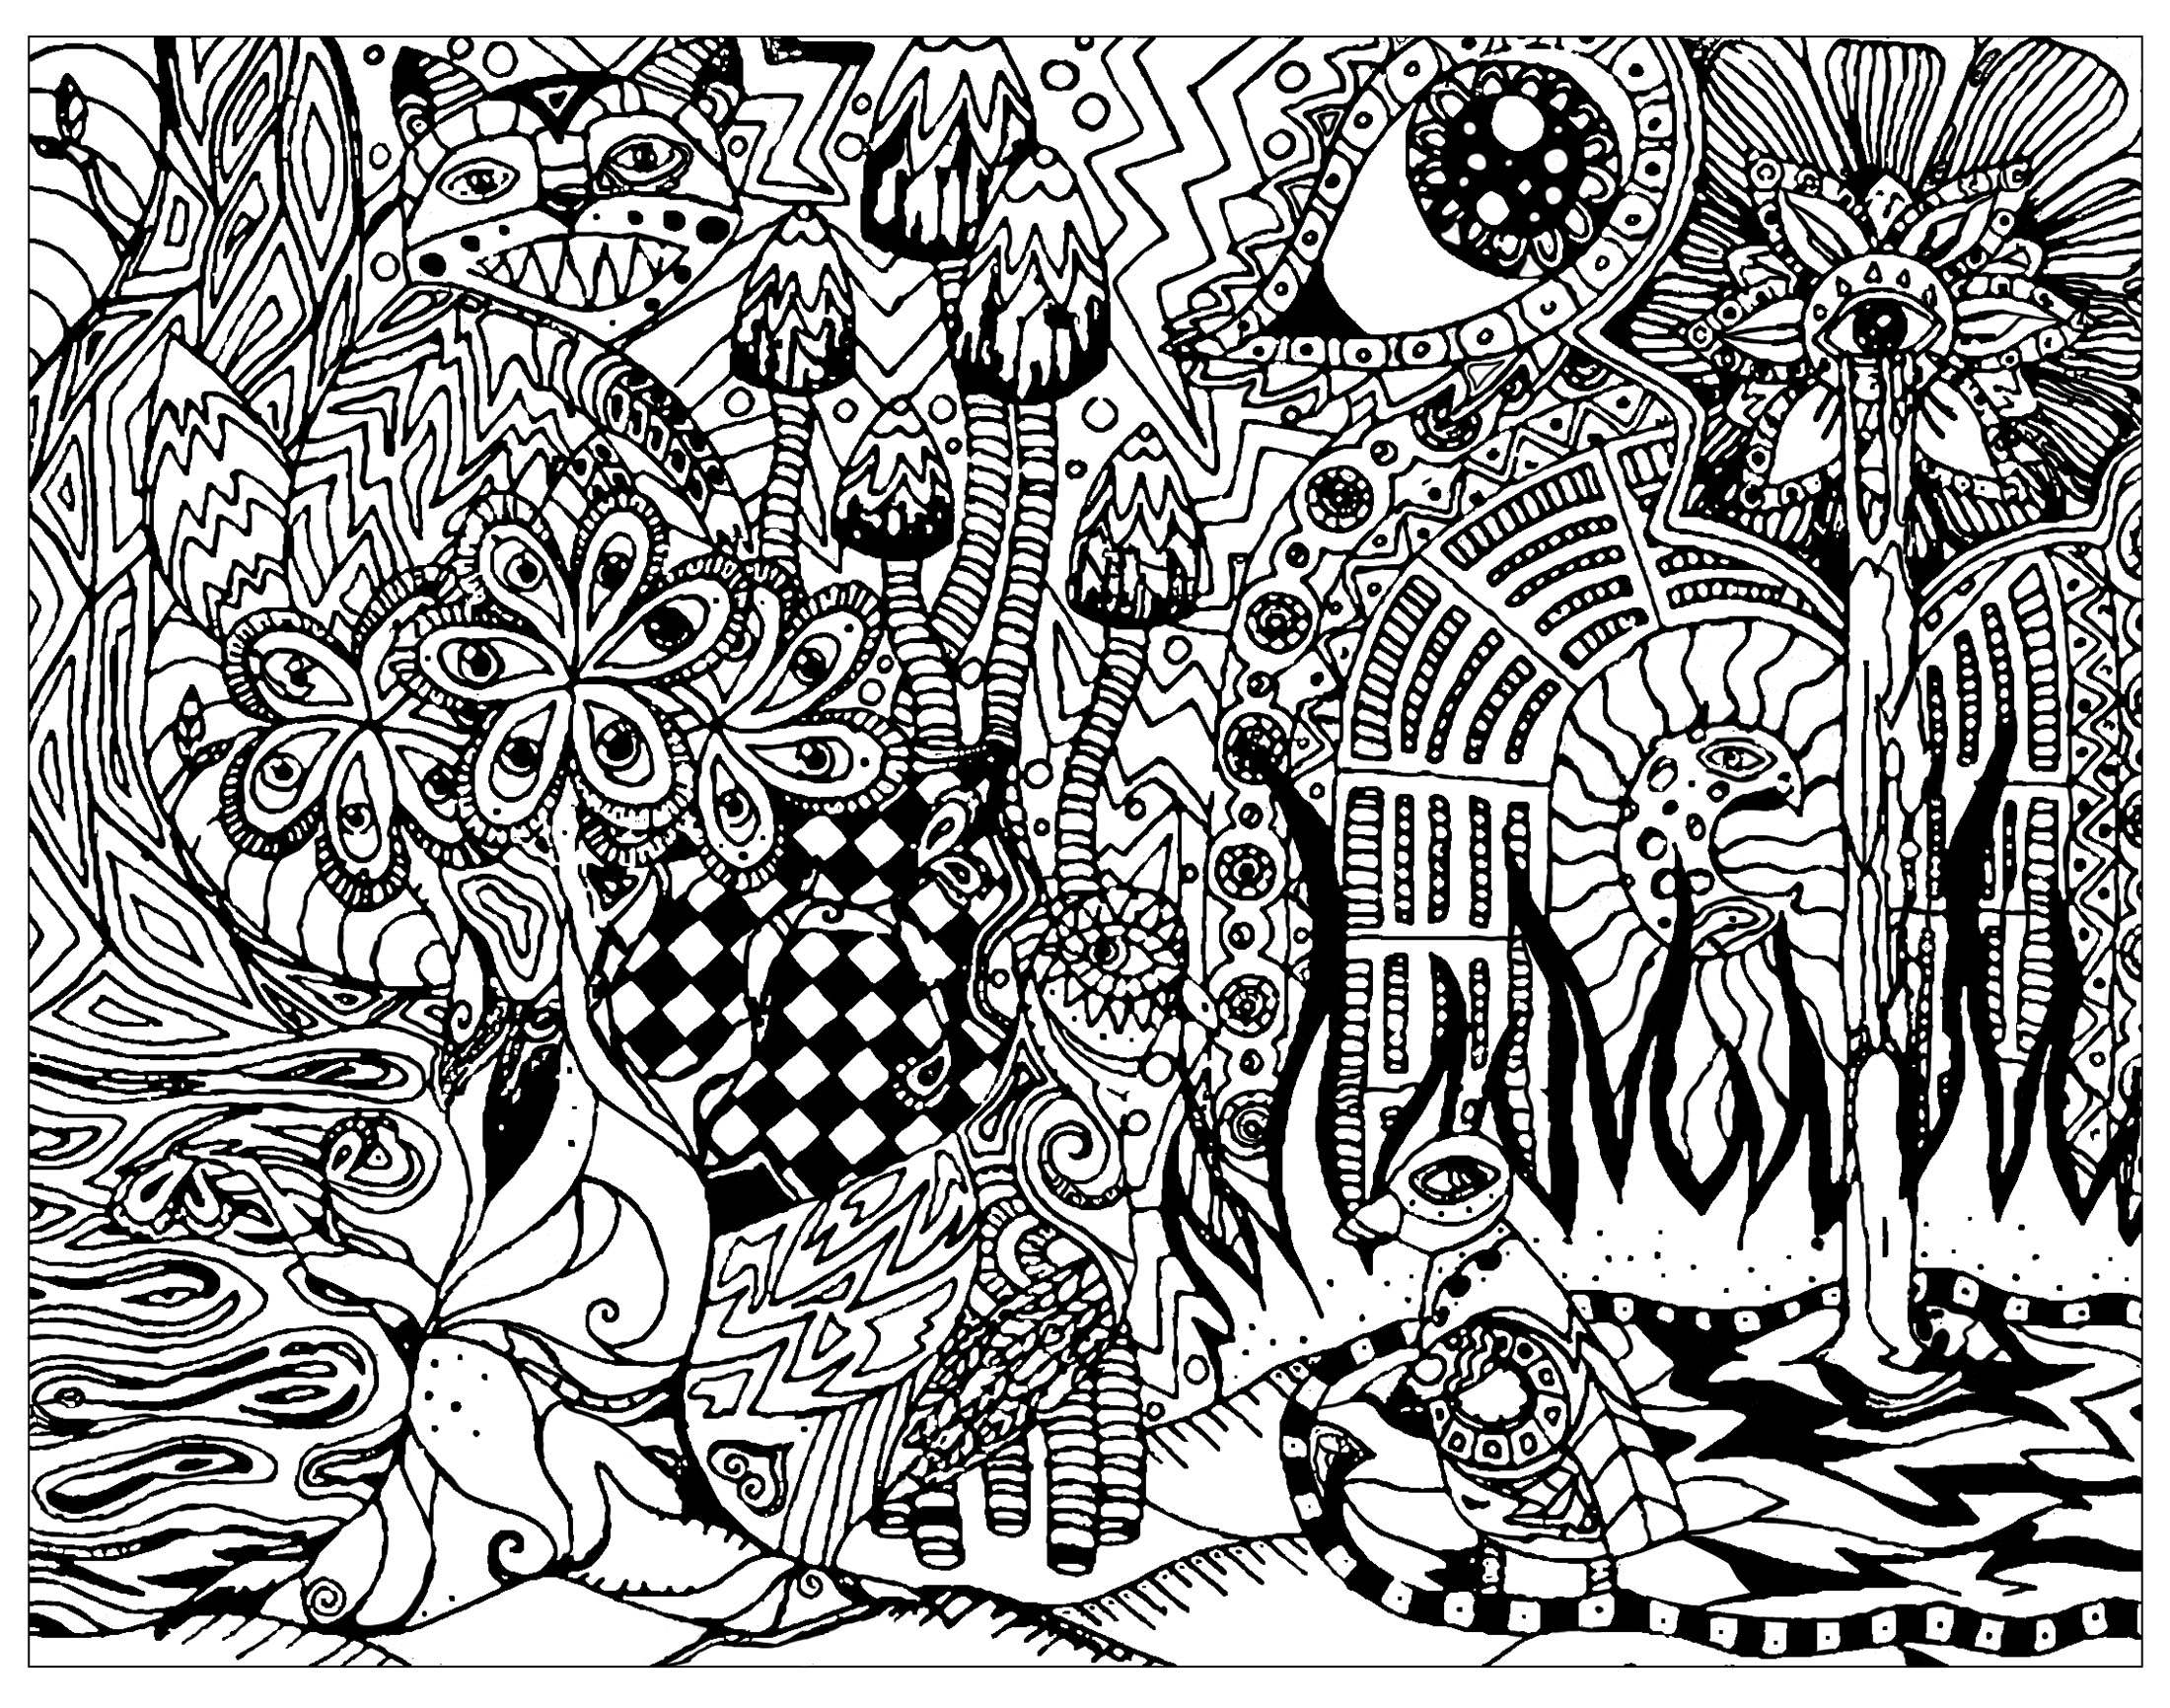 Psychedelic patterns hidden cat Psychedelic Adult Coloring Pages